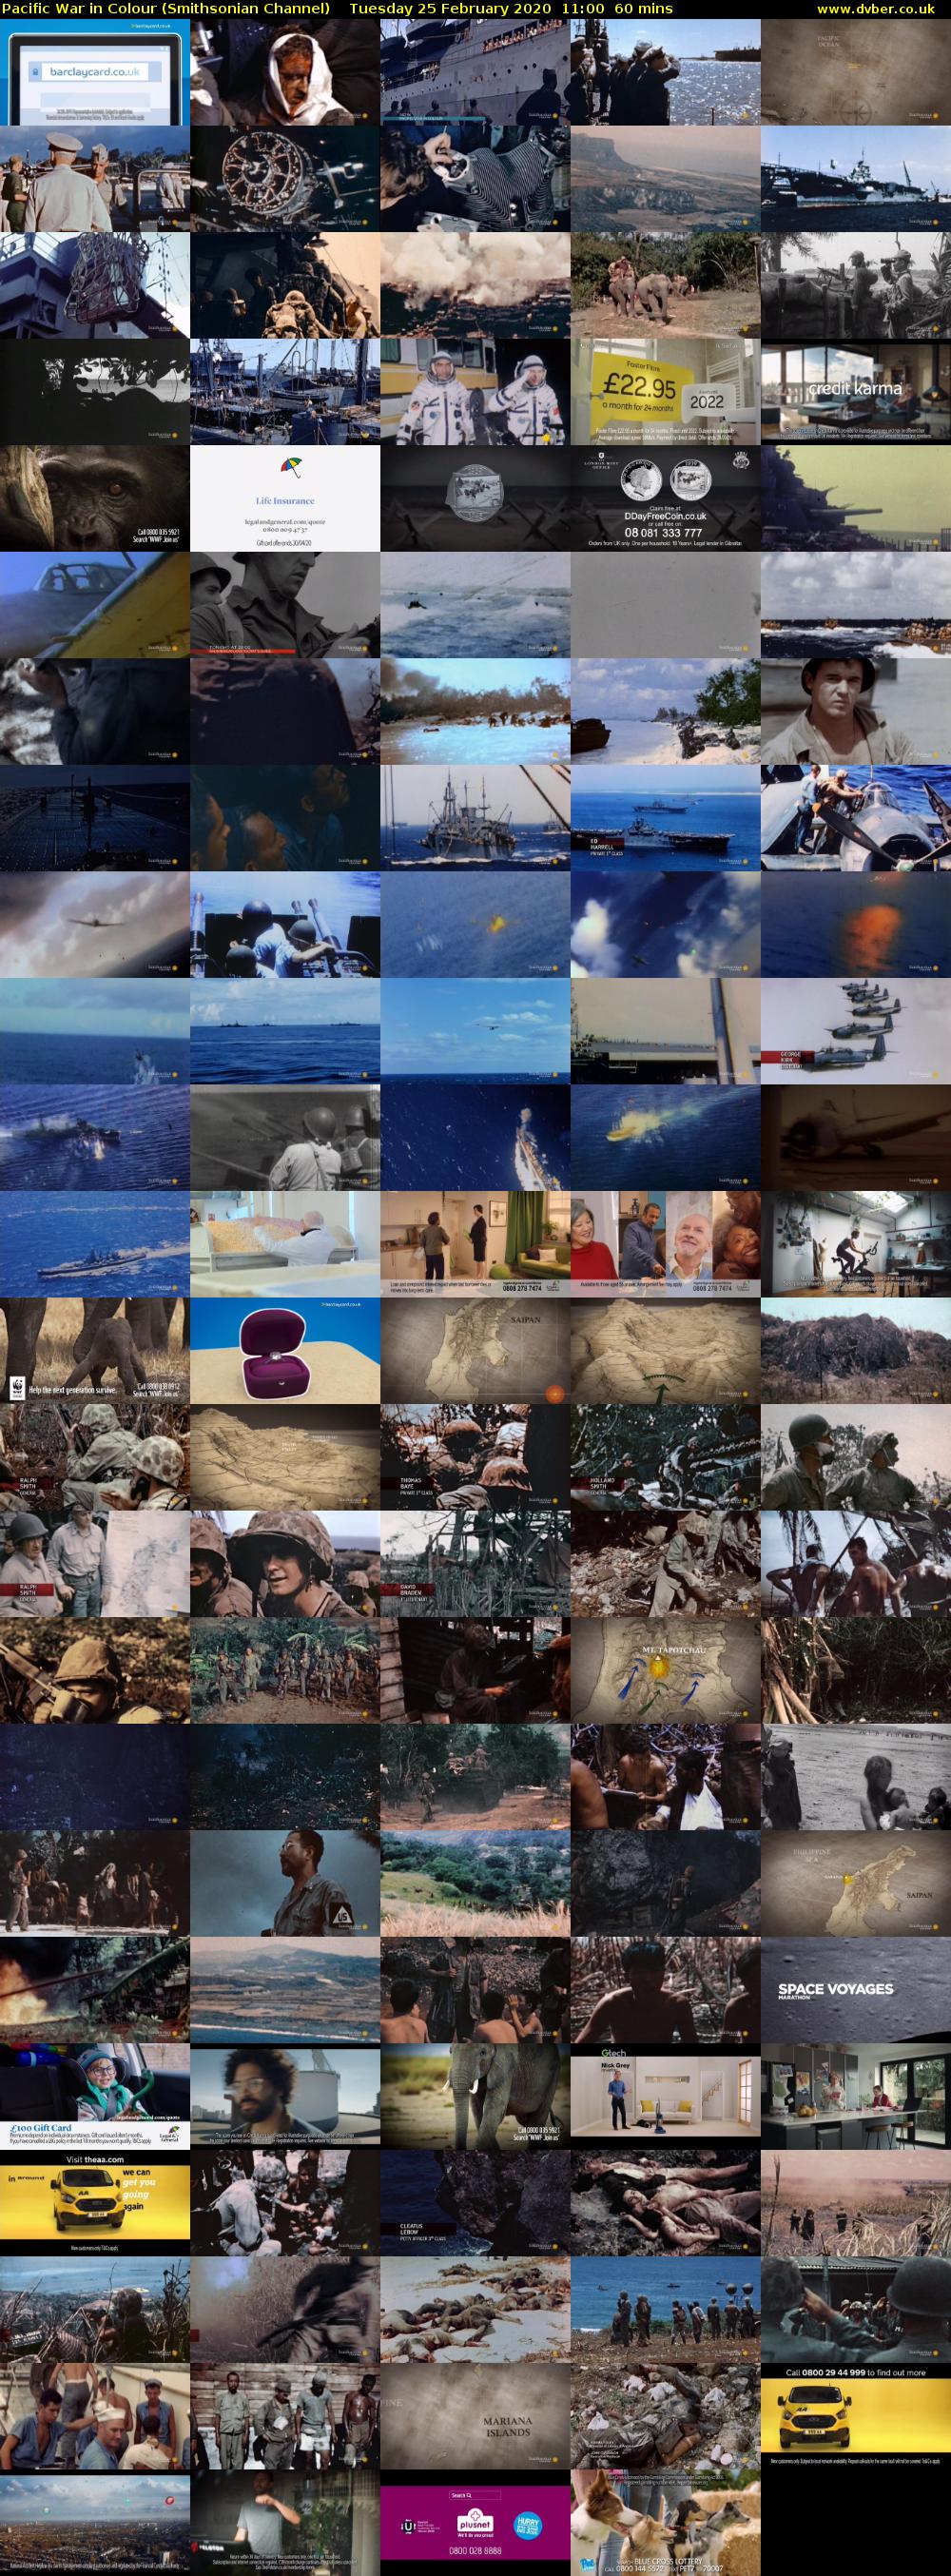 Pacific War in Colour (Smithsonian Channel) Tuesday 25 February 2020 11:00 - 12:00